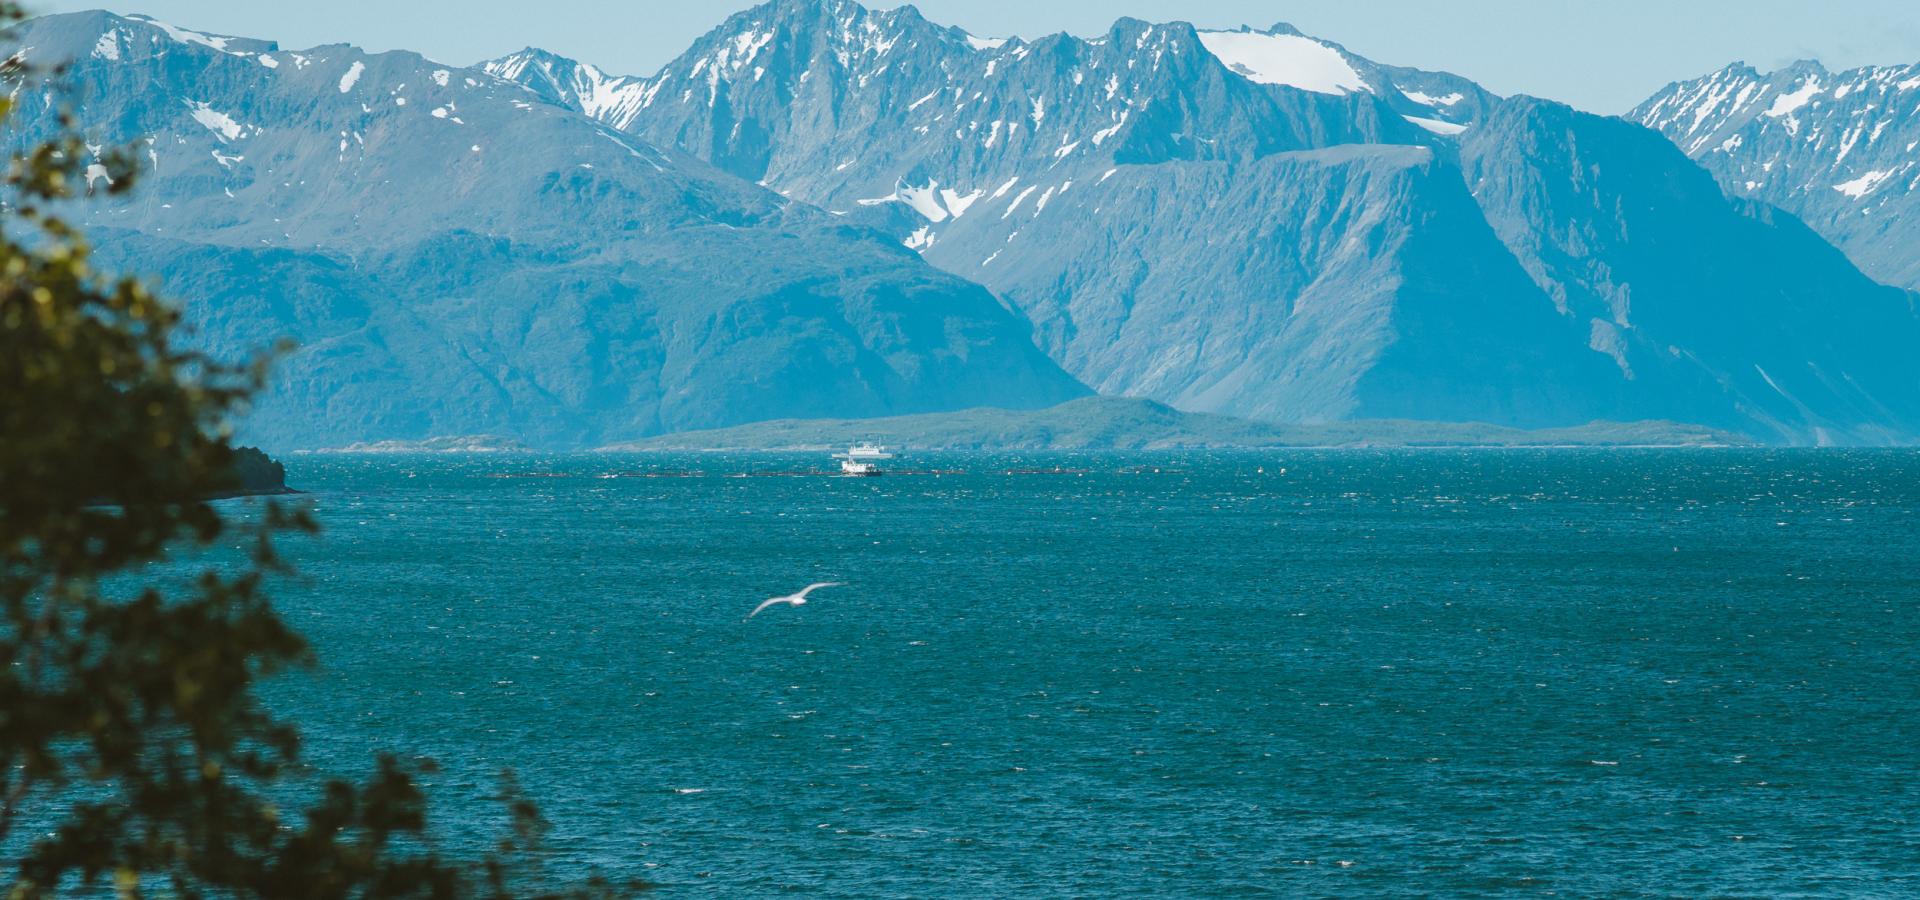 The Lyngenfjord with the Kåfjord mountains in the background and the ferry on the fjord